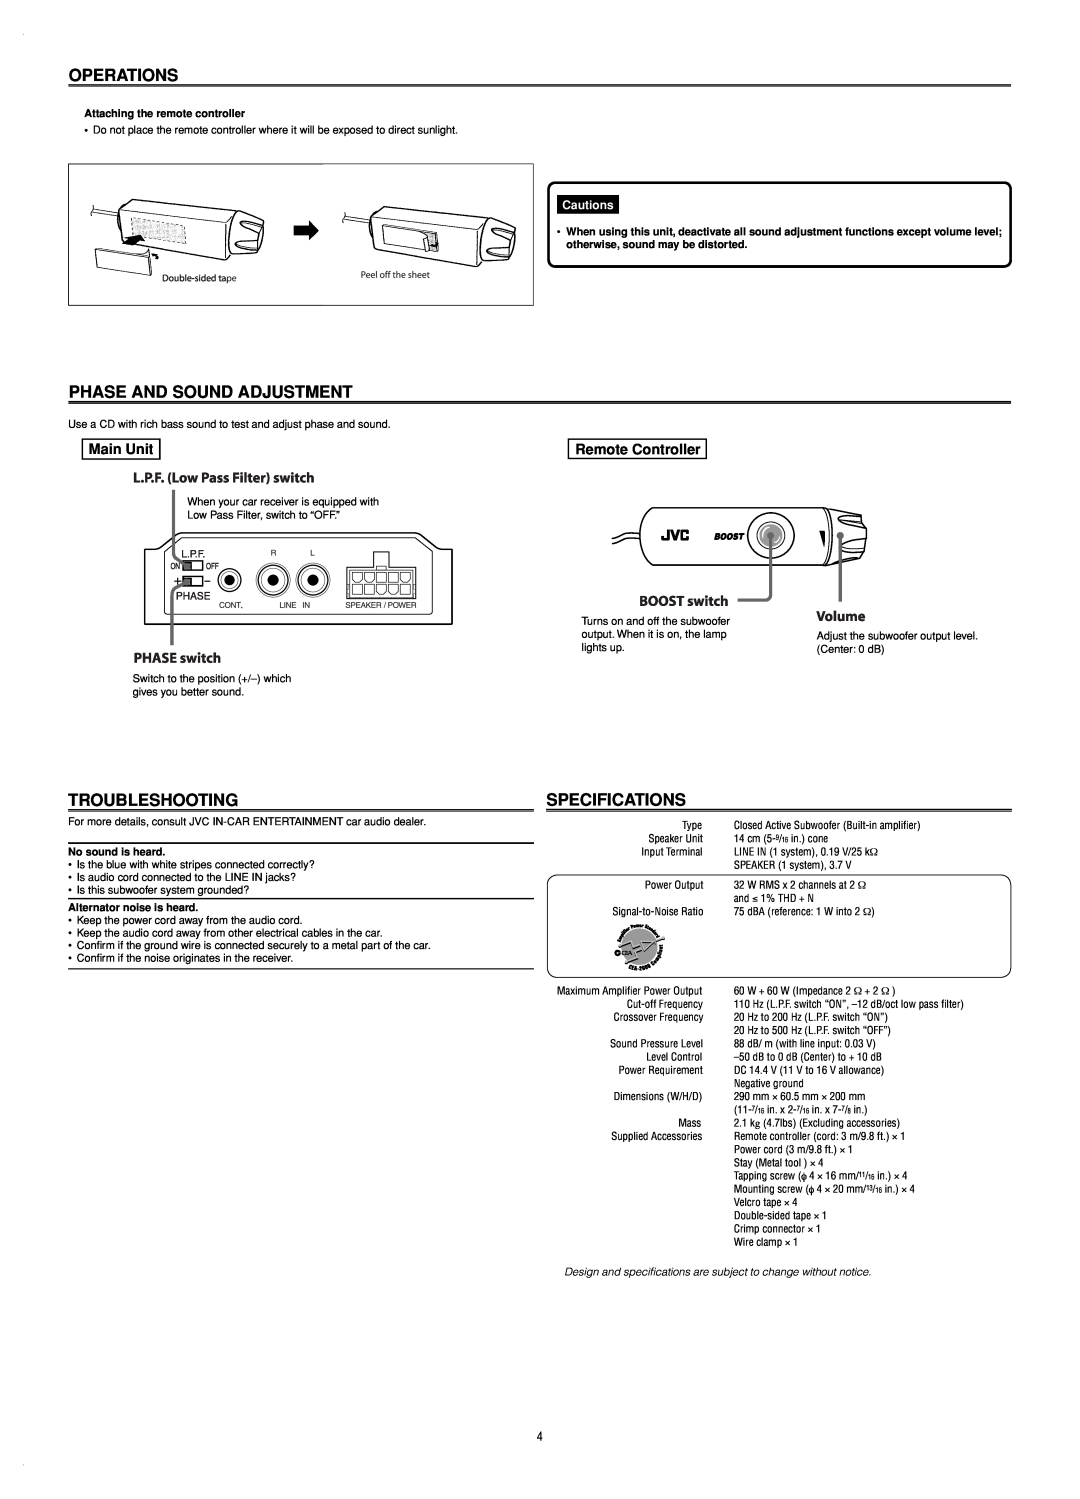 JVC CS-BB2 Operations, Phase And Sound Adjustment, Troubleshooting, Specifications, Attaching the remote controller 